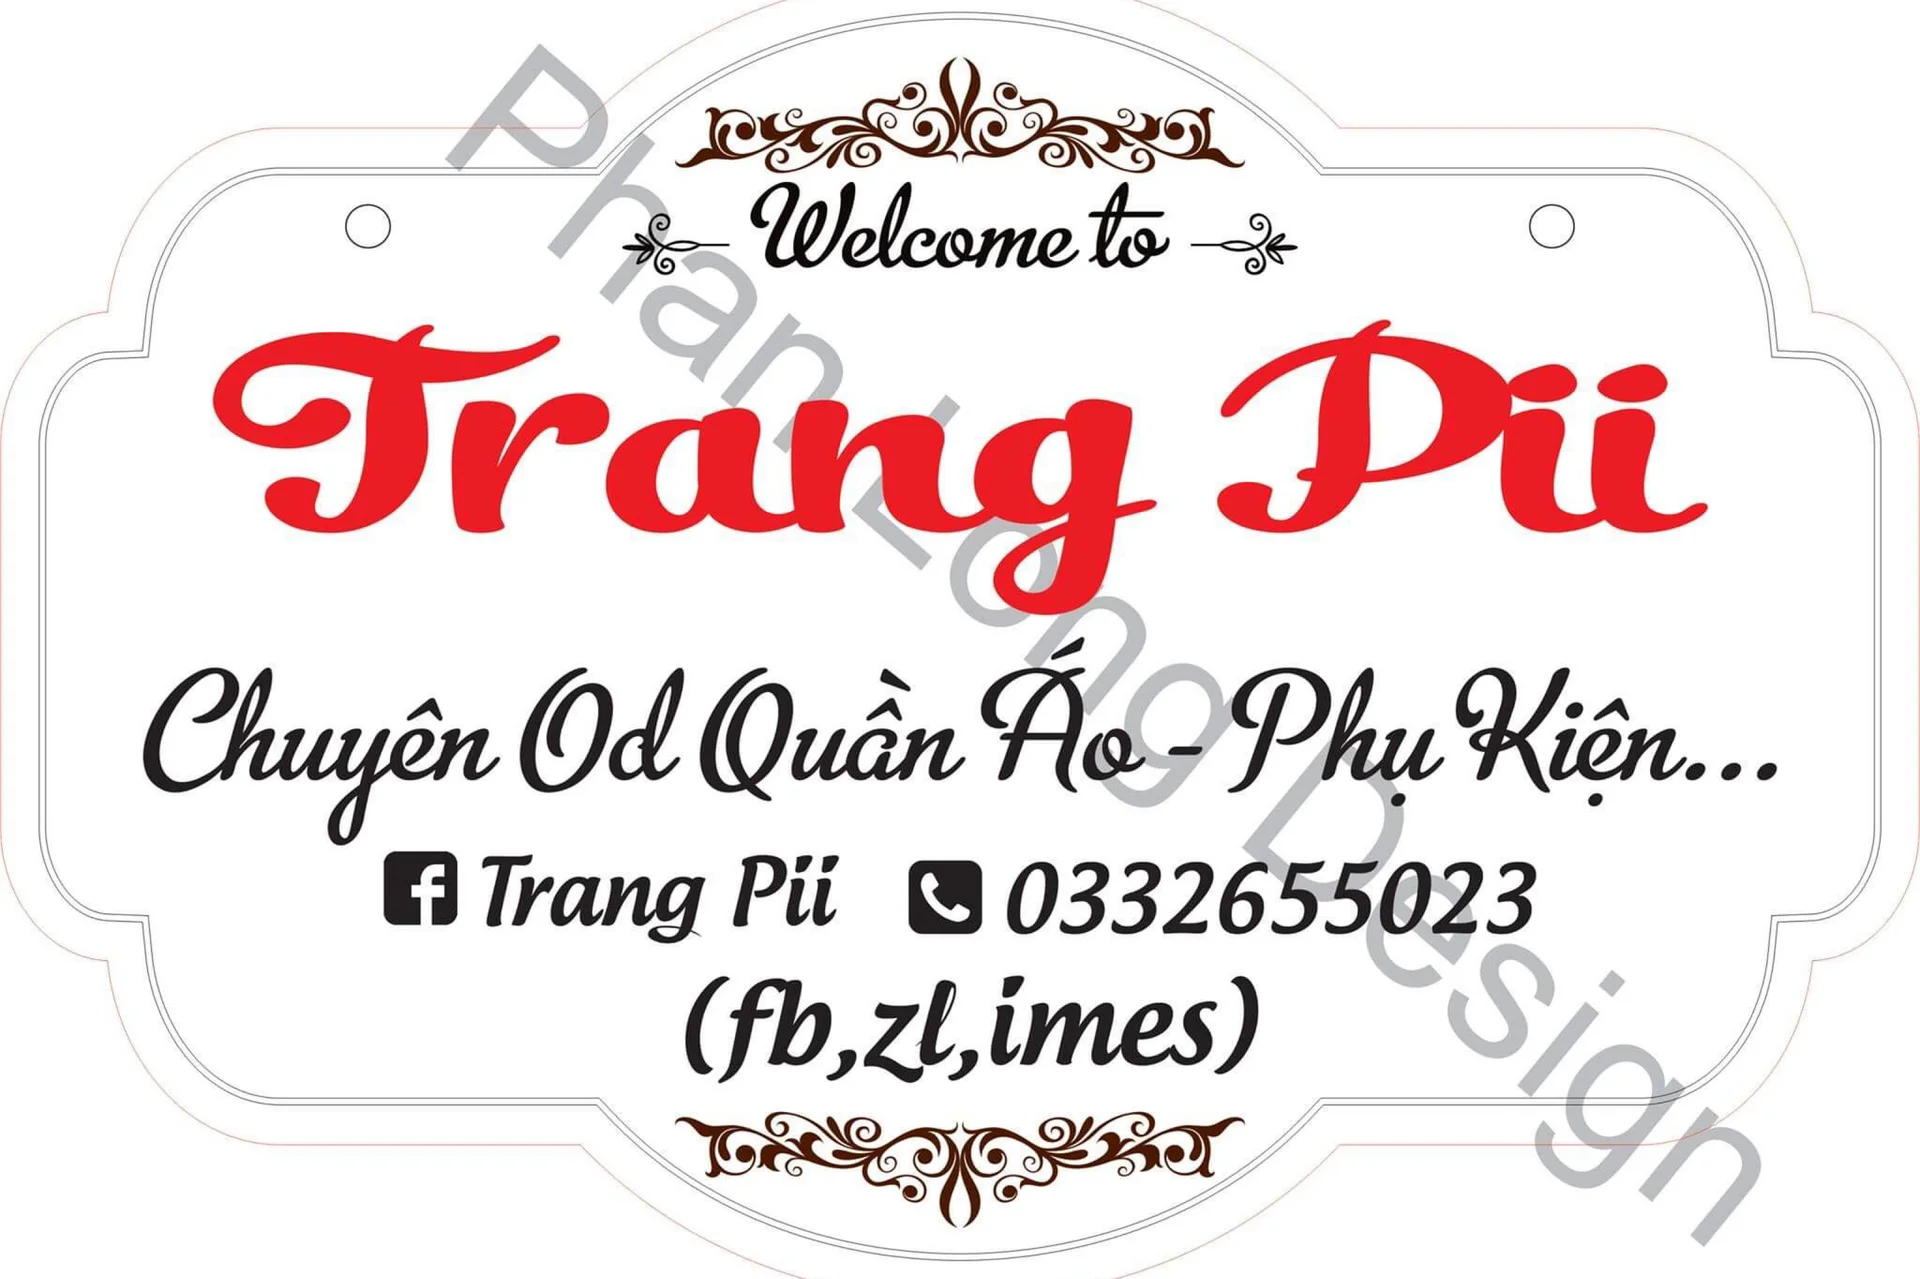 Trang Pii's cover photo